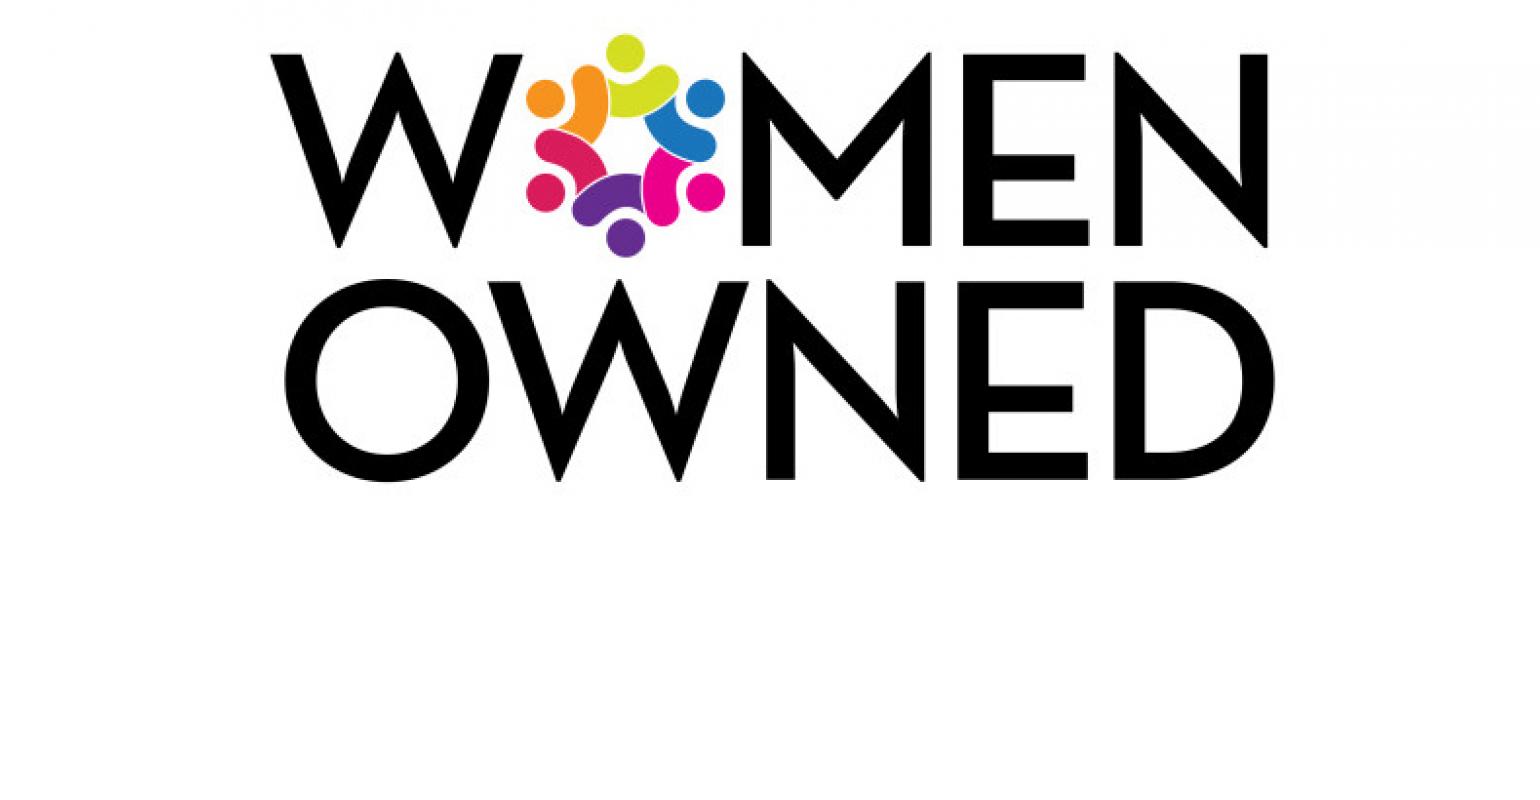 Women Owned Business Market